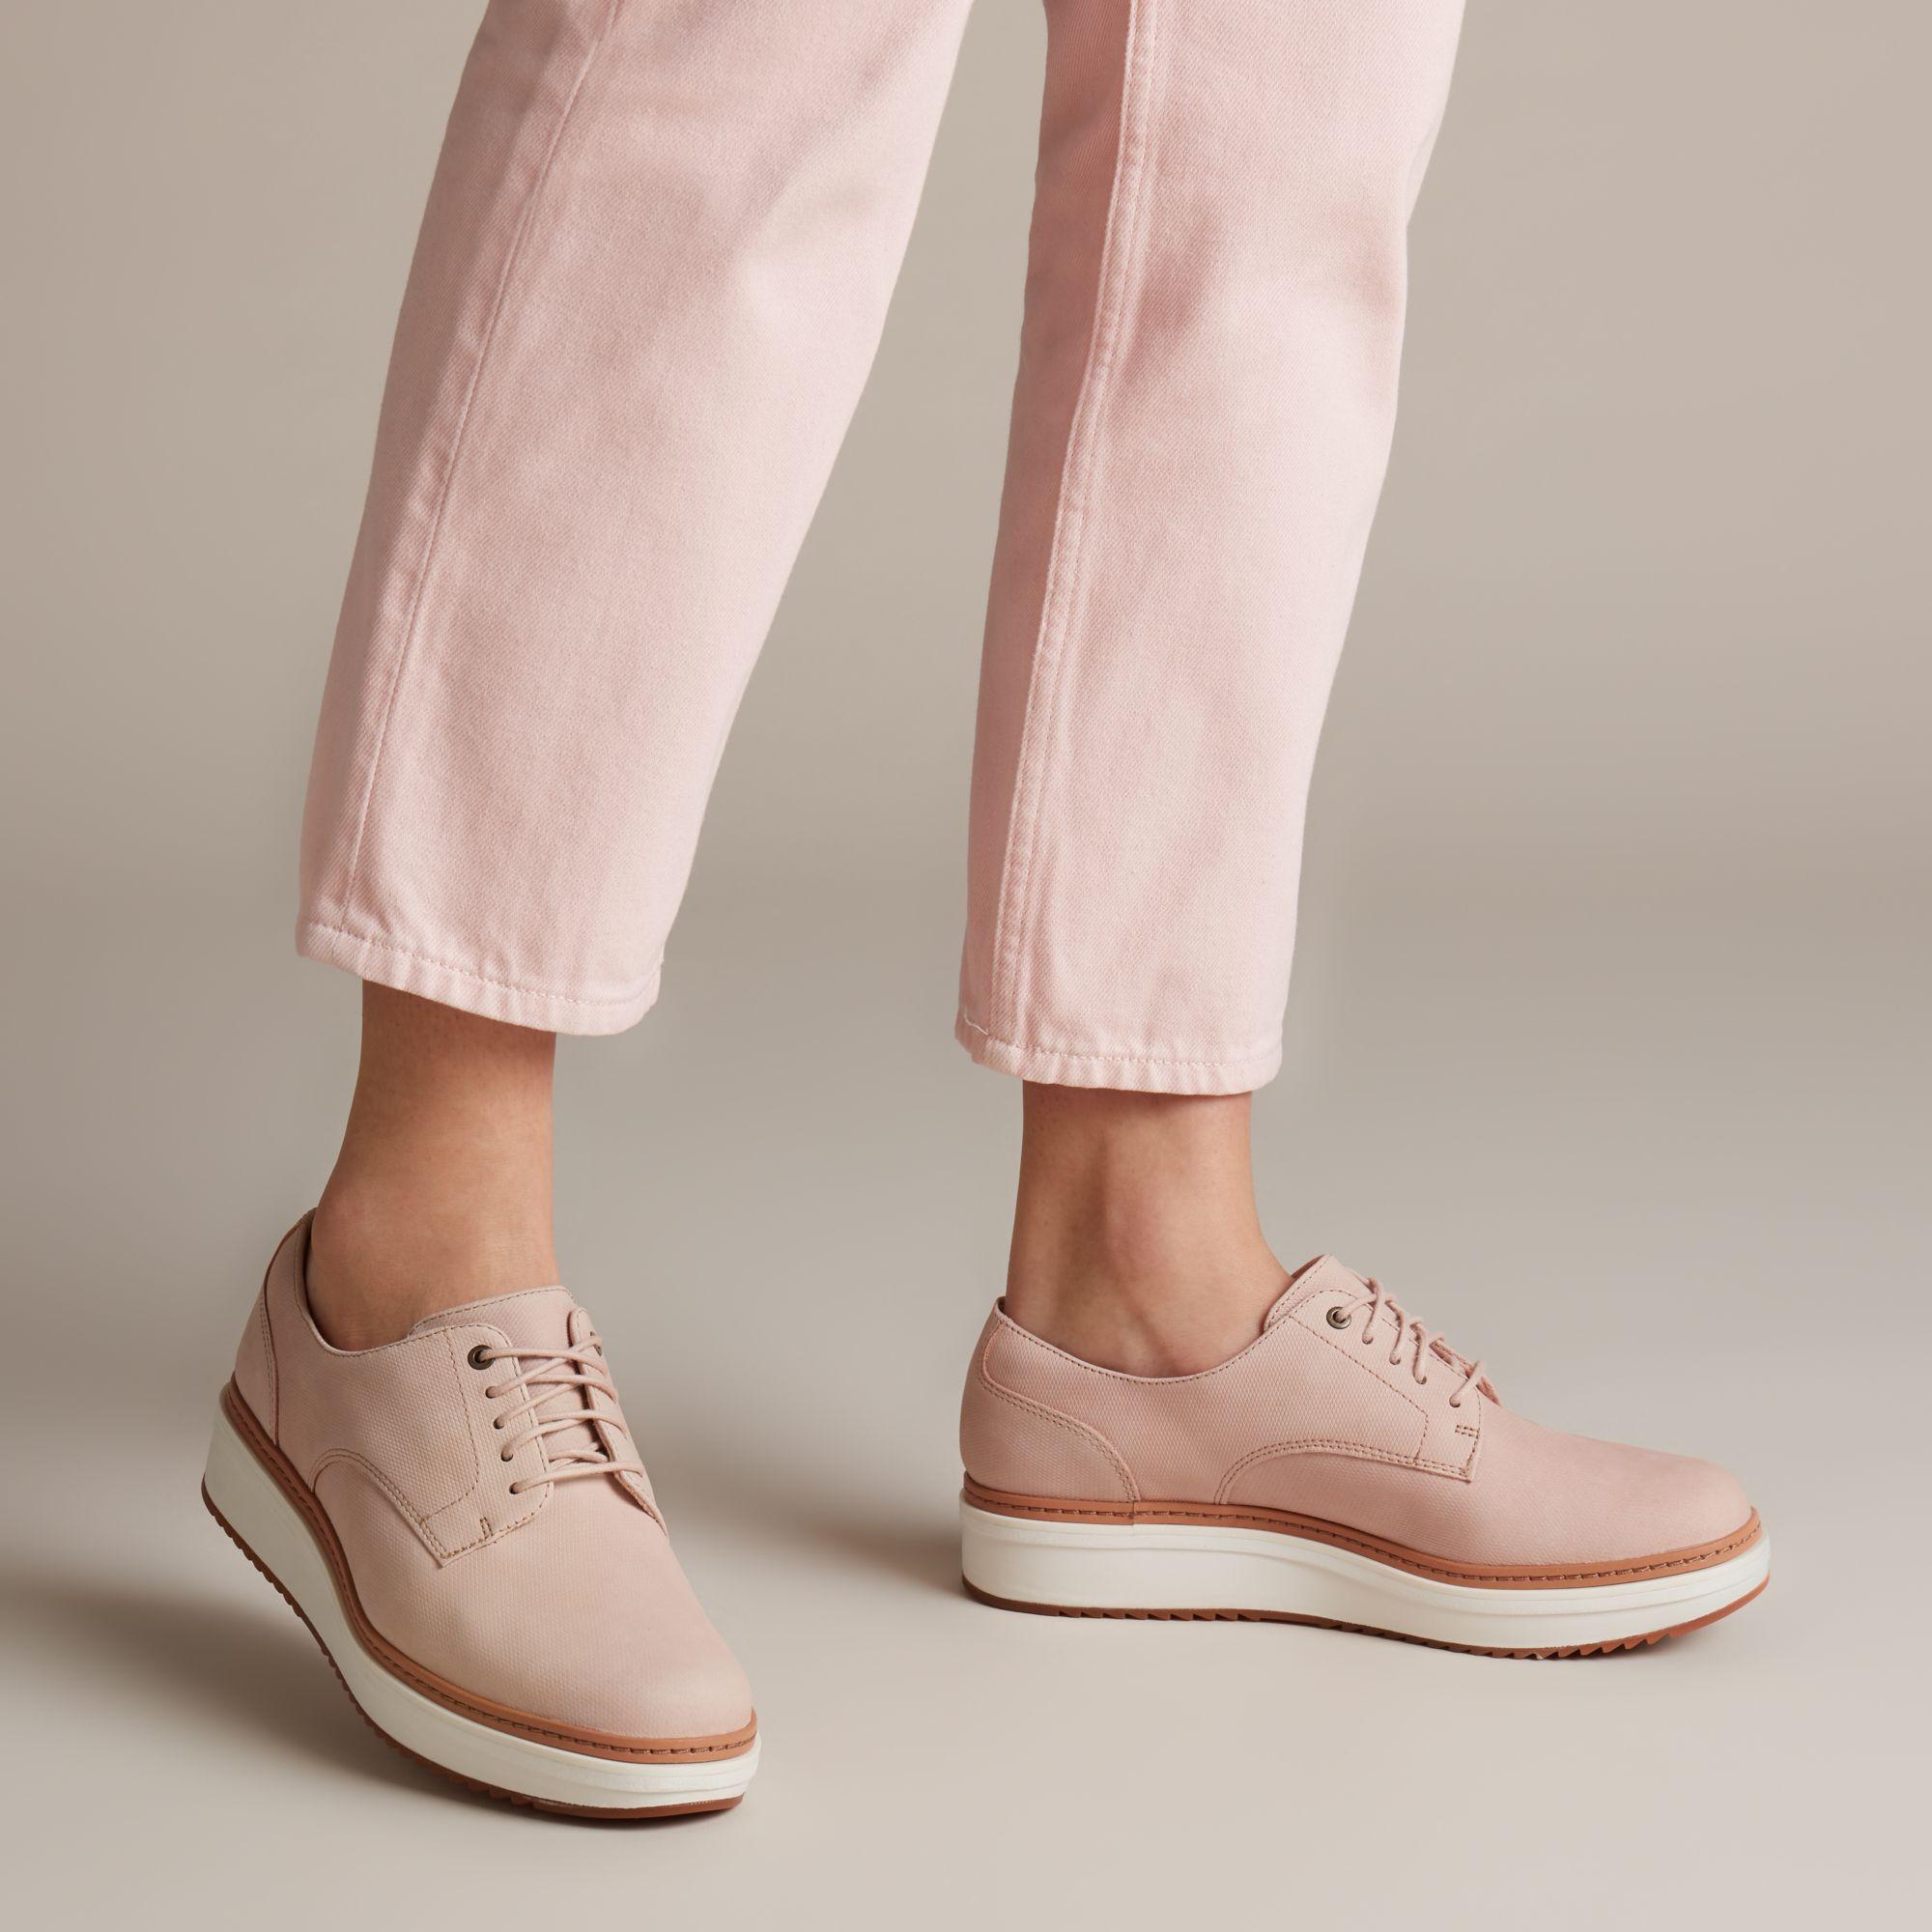 Clarks Leather Teadale Rhea Oxford in Blush Pink Nubuck (Pink) - Save 62% |  Lyst